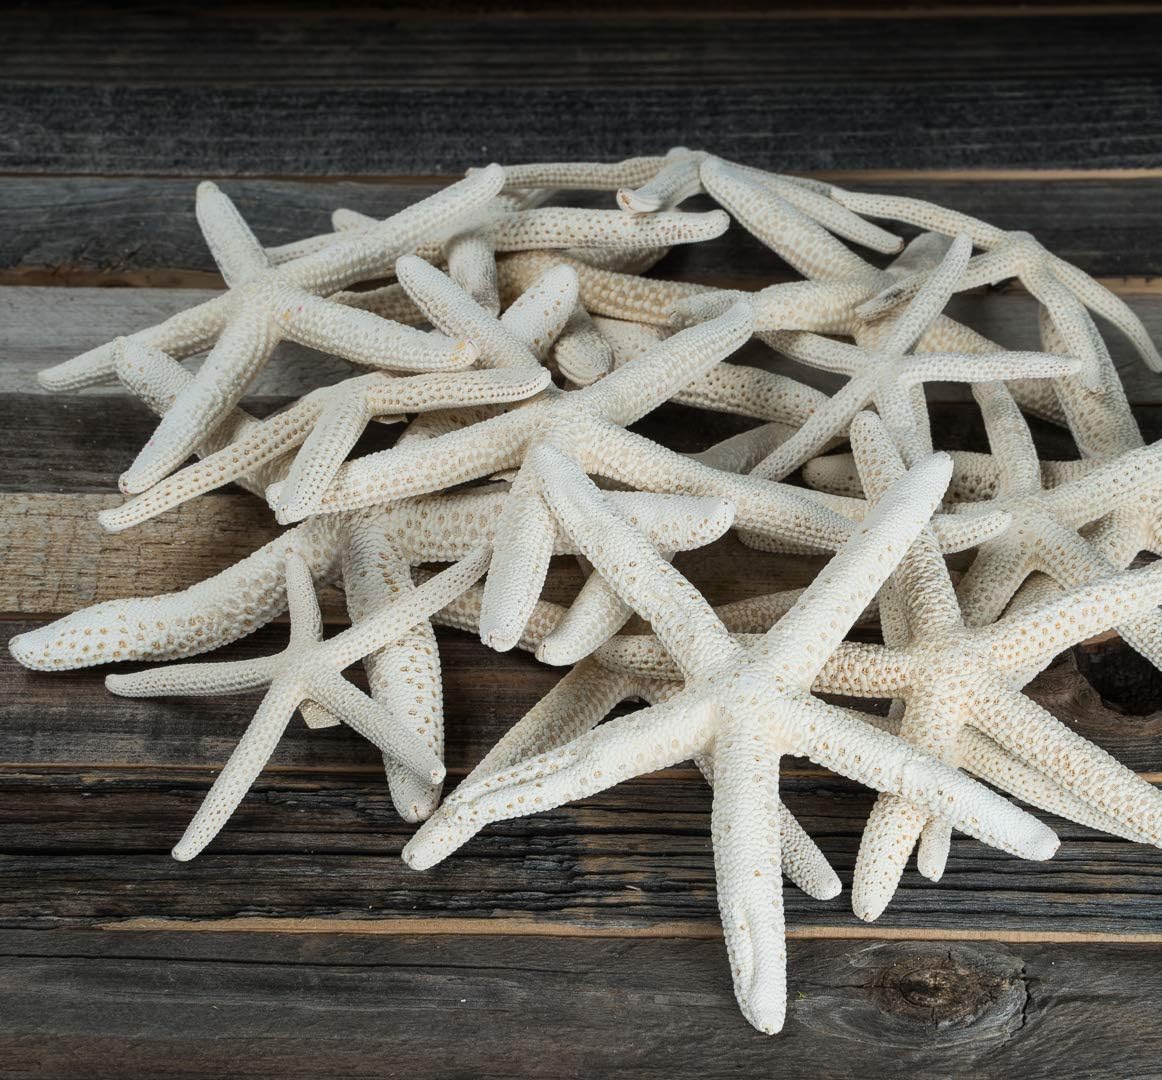 Finger Starfish White Uniquely Shaped Assortment 2&#x22; to 5&#x22; 15 Pieces Craft Starfish Imperfect Starfish for Craft and Decoration